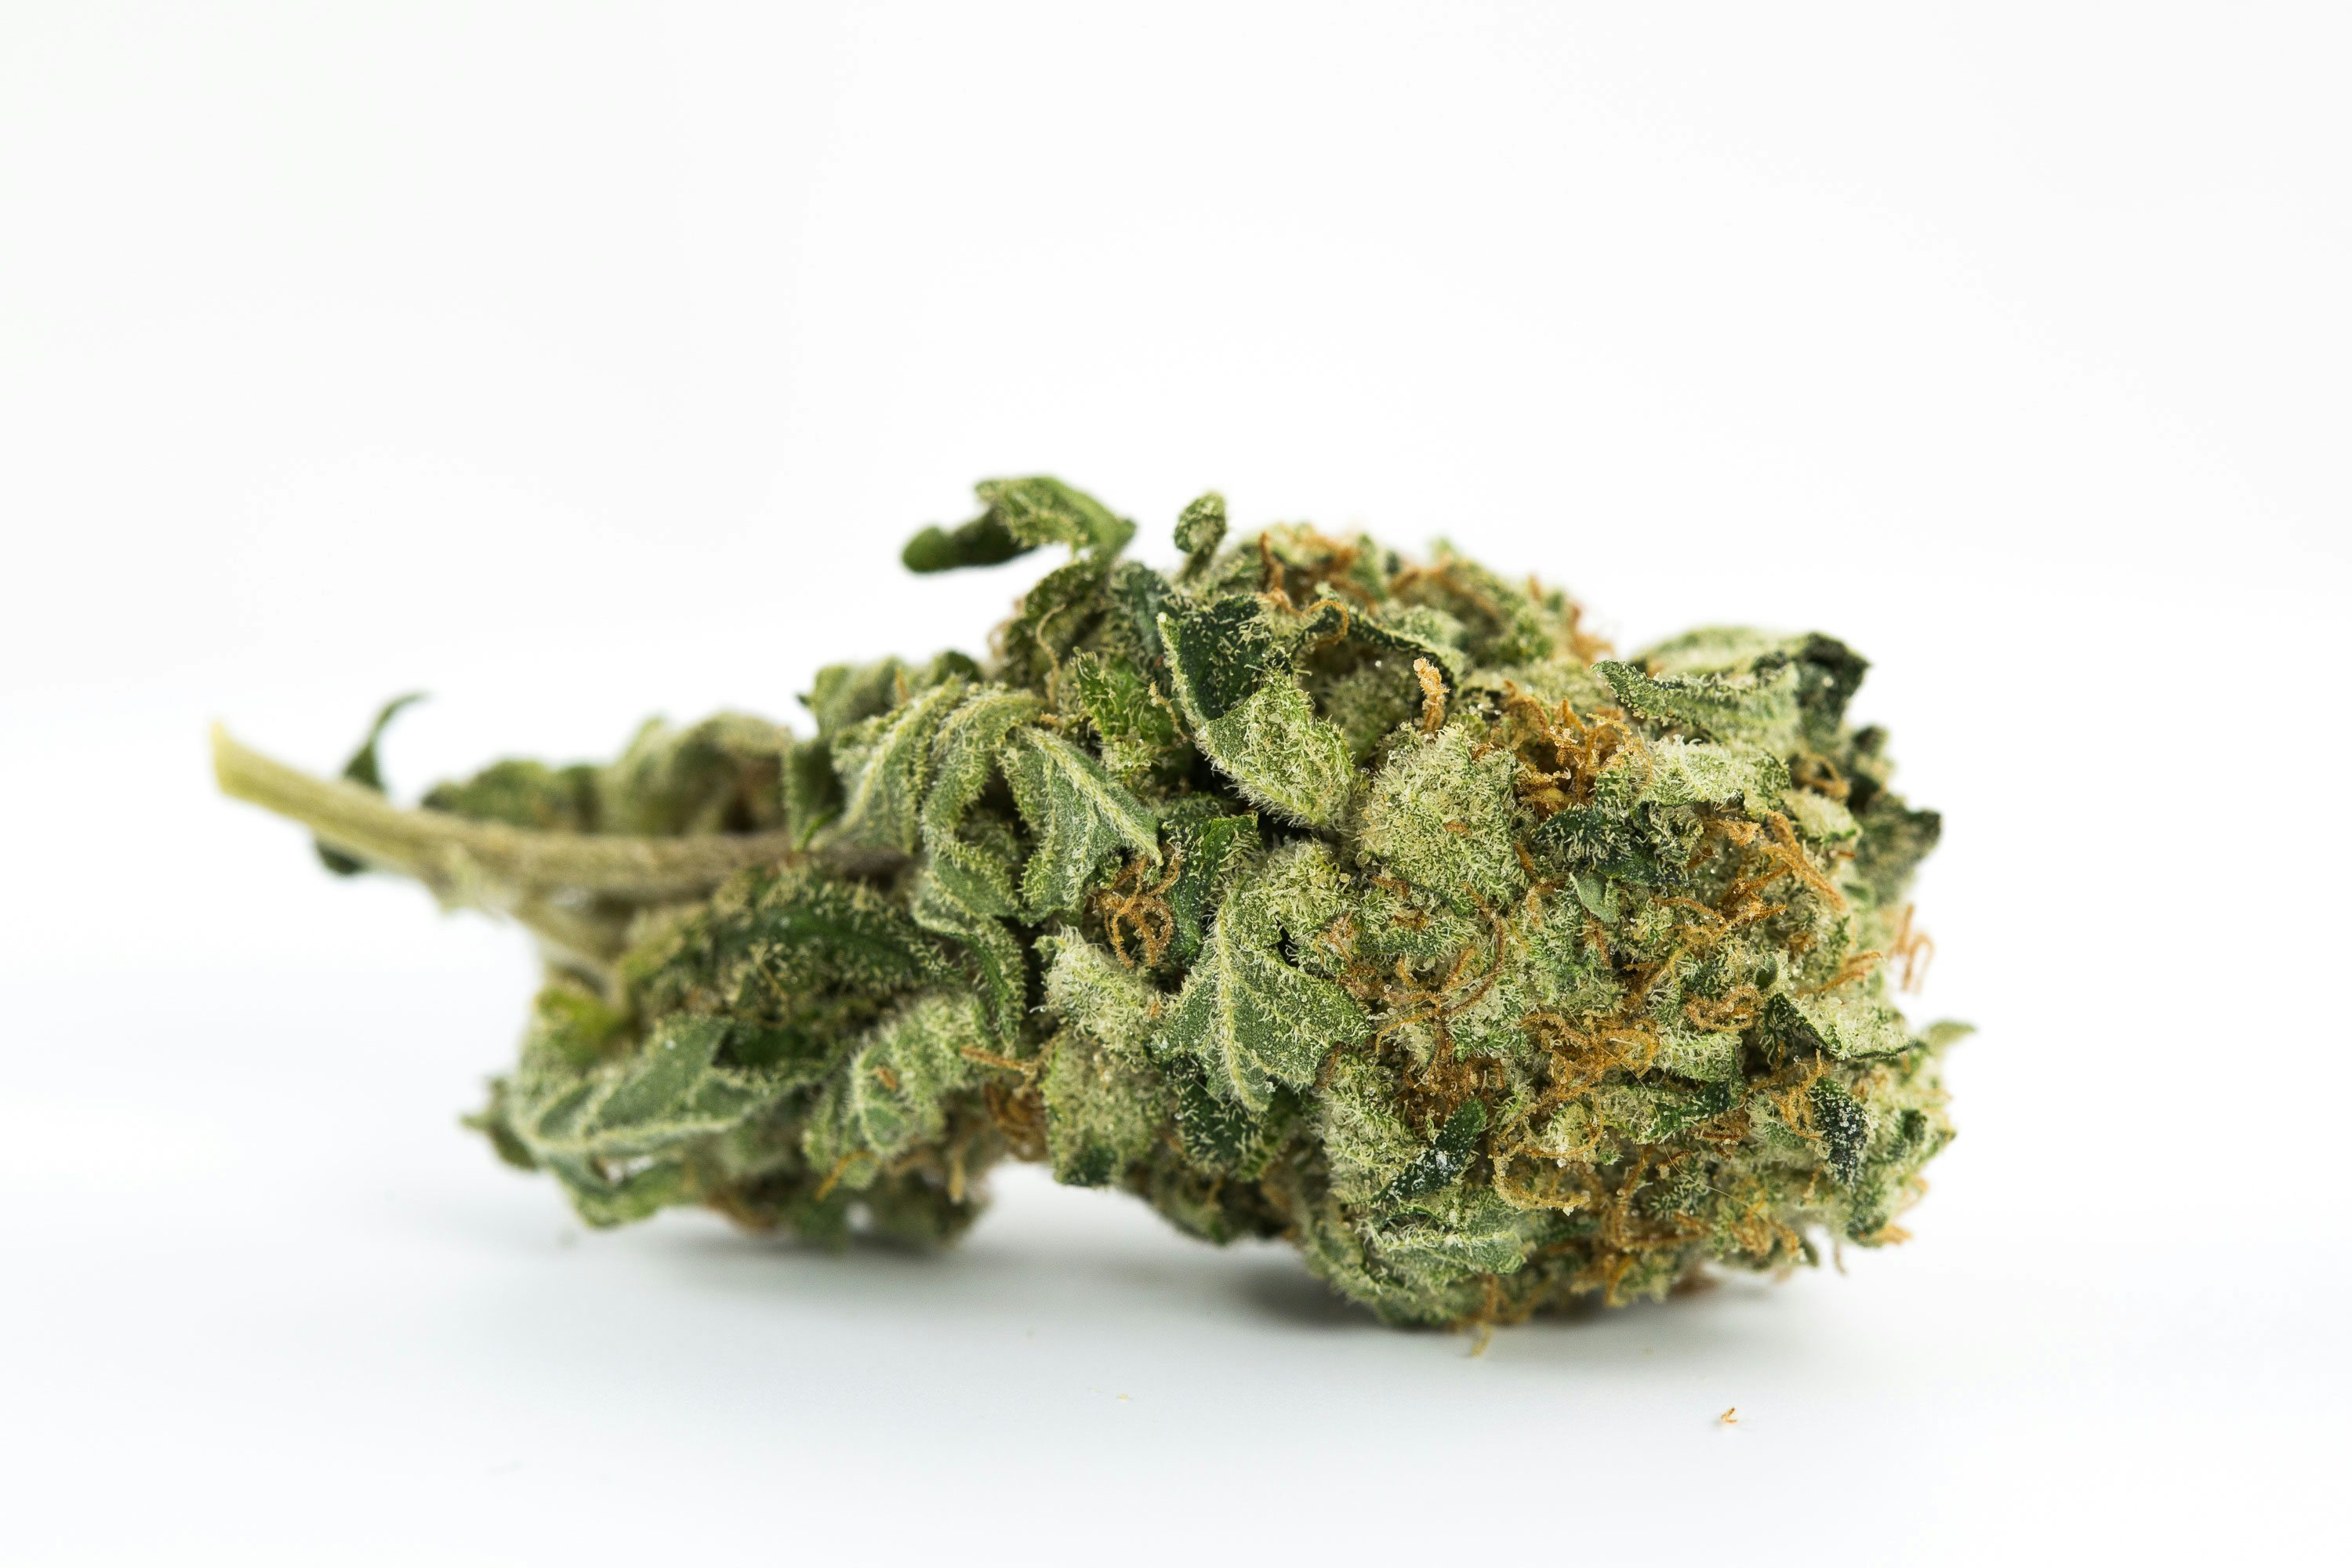 9Best Star Wars Strains To Take You To A Galaxy Far Far Away Best Star Wars Strains To Take You To A Galaxy Far, Far Away